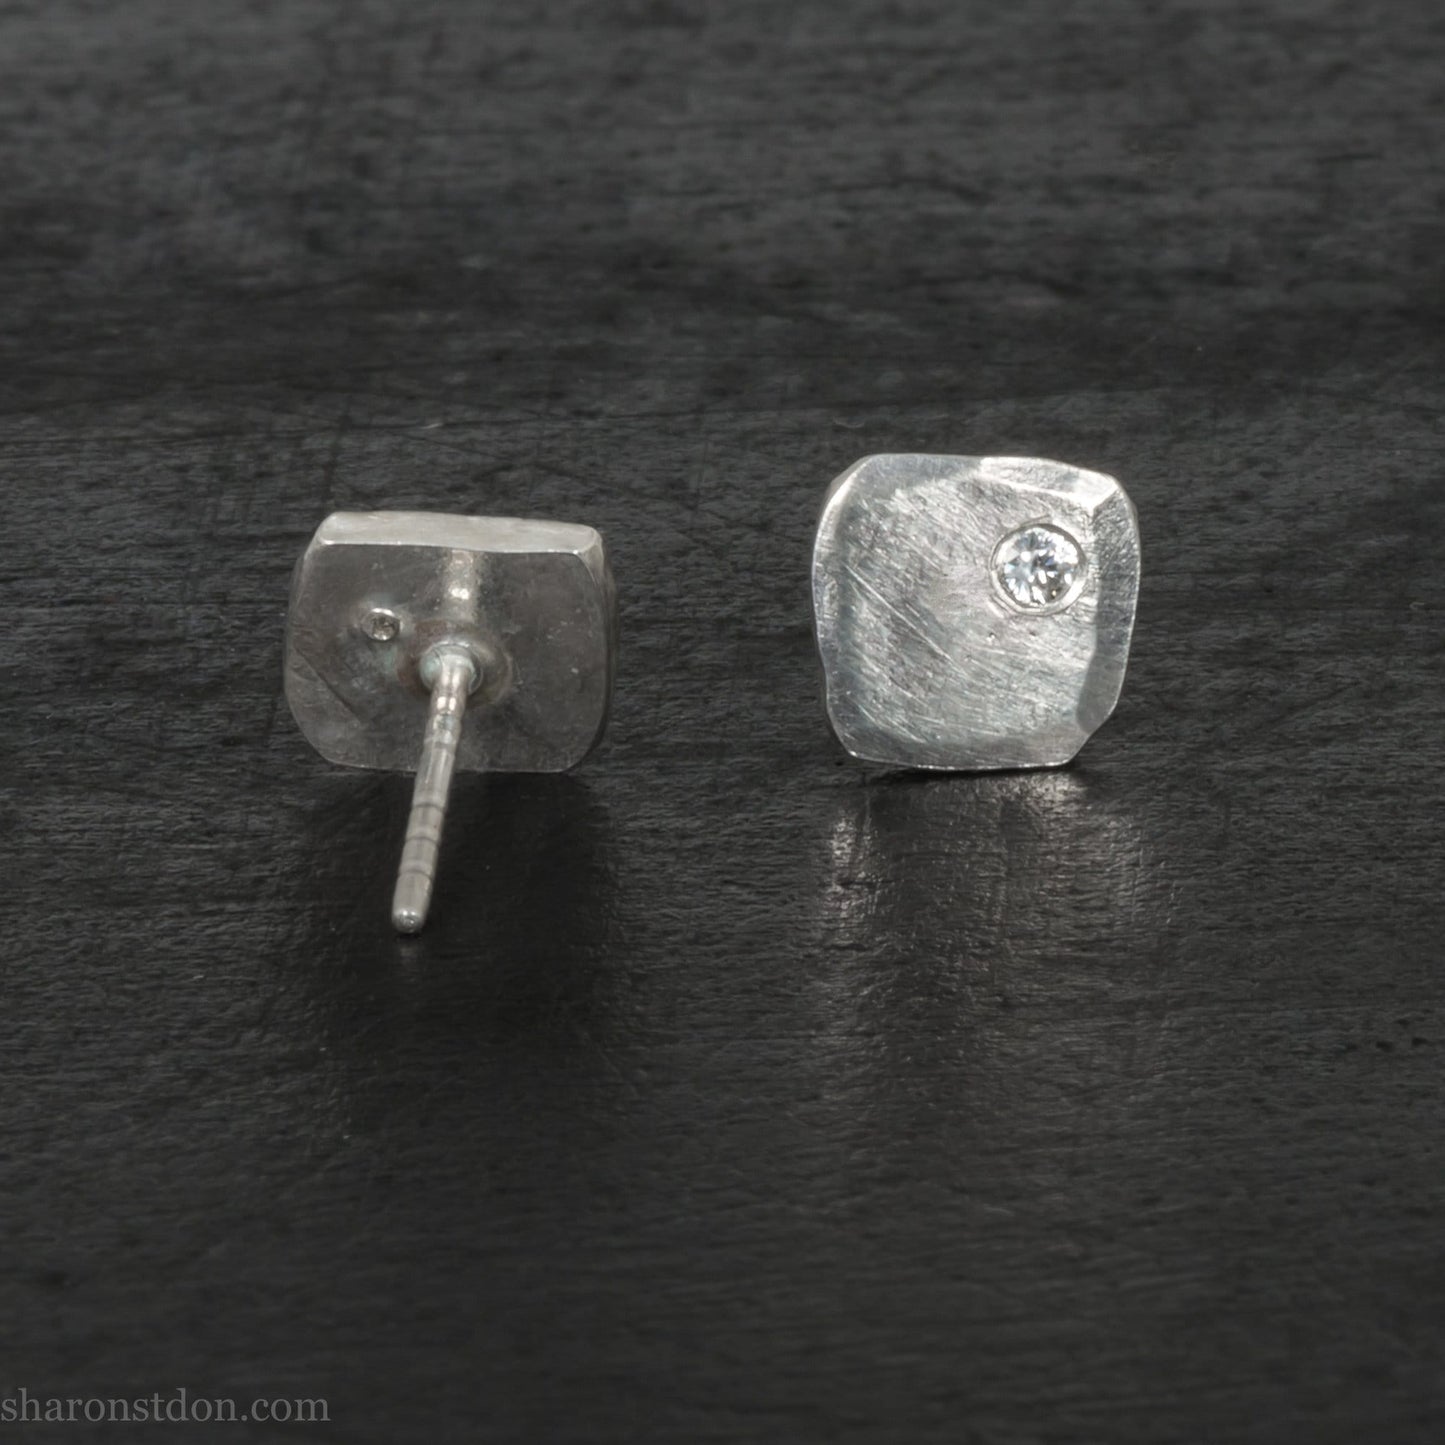 Handmade 925 sterling silver stud earrings with Canadian diamond gemstones. Small square stud earrings made by Sharon SaintDon in North America. Canadamark diamonds.